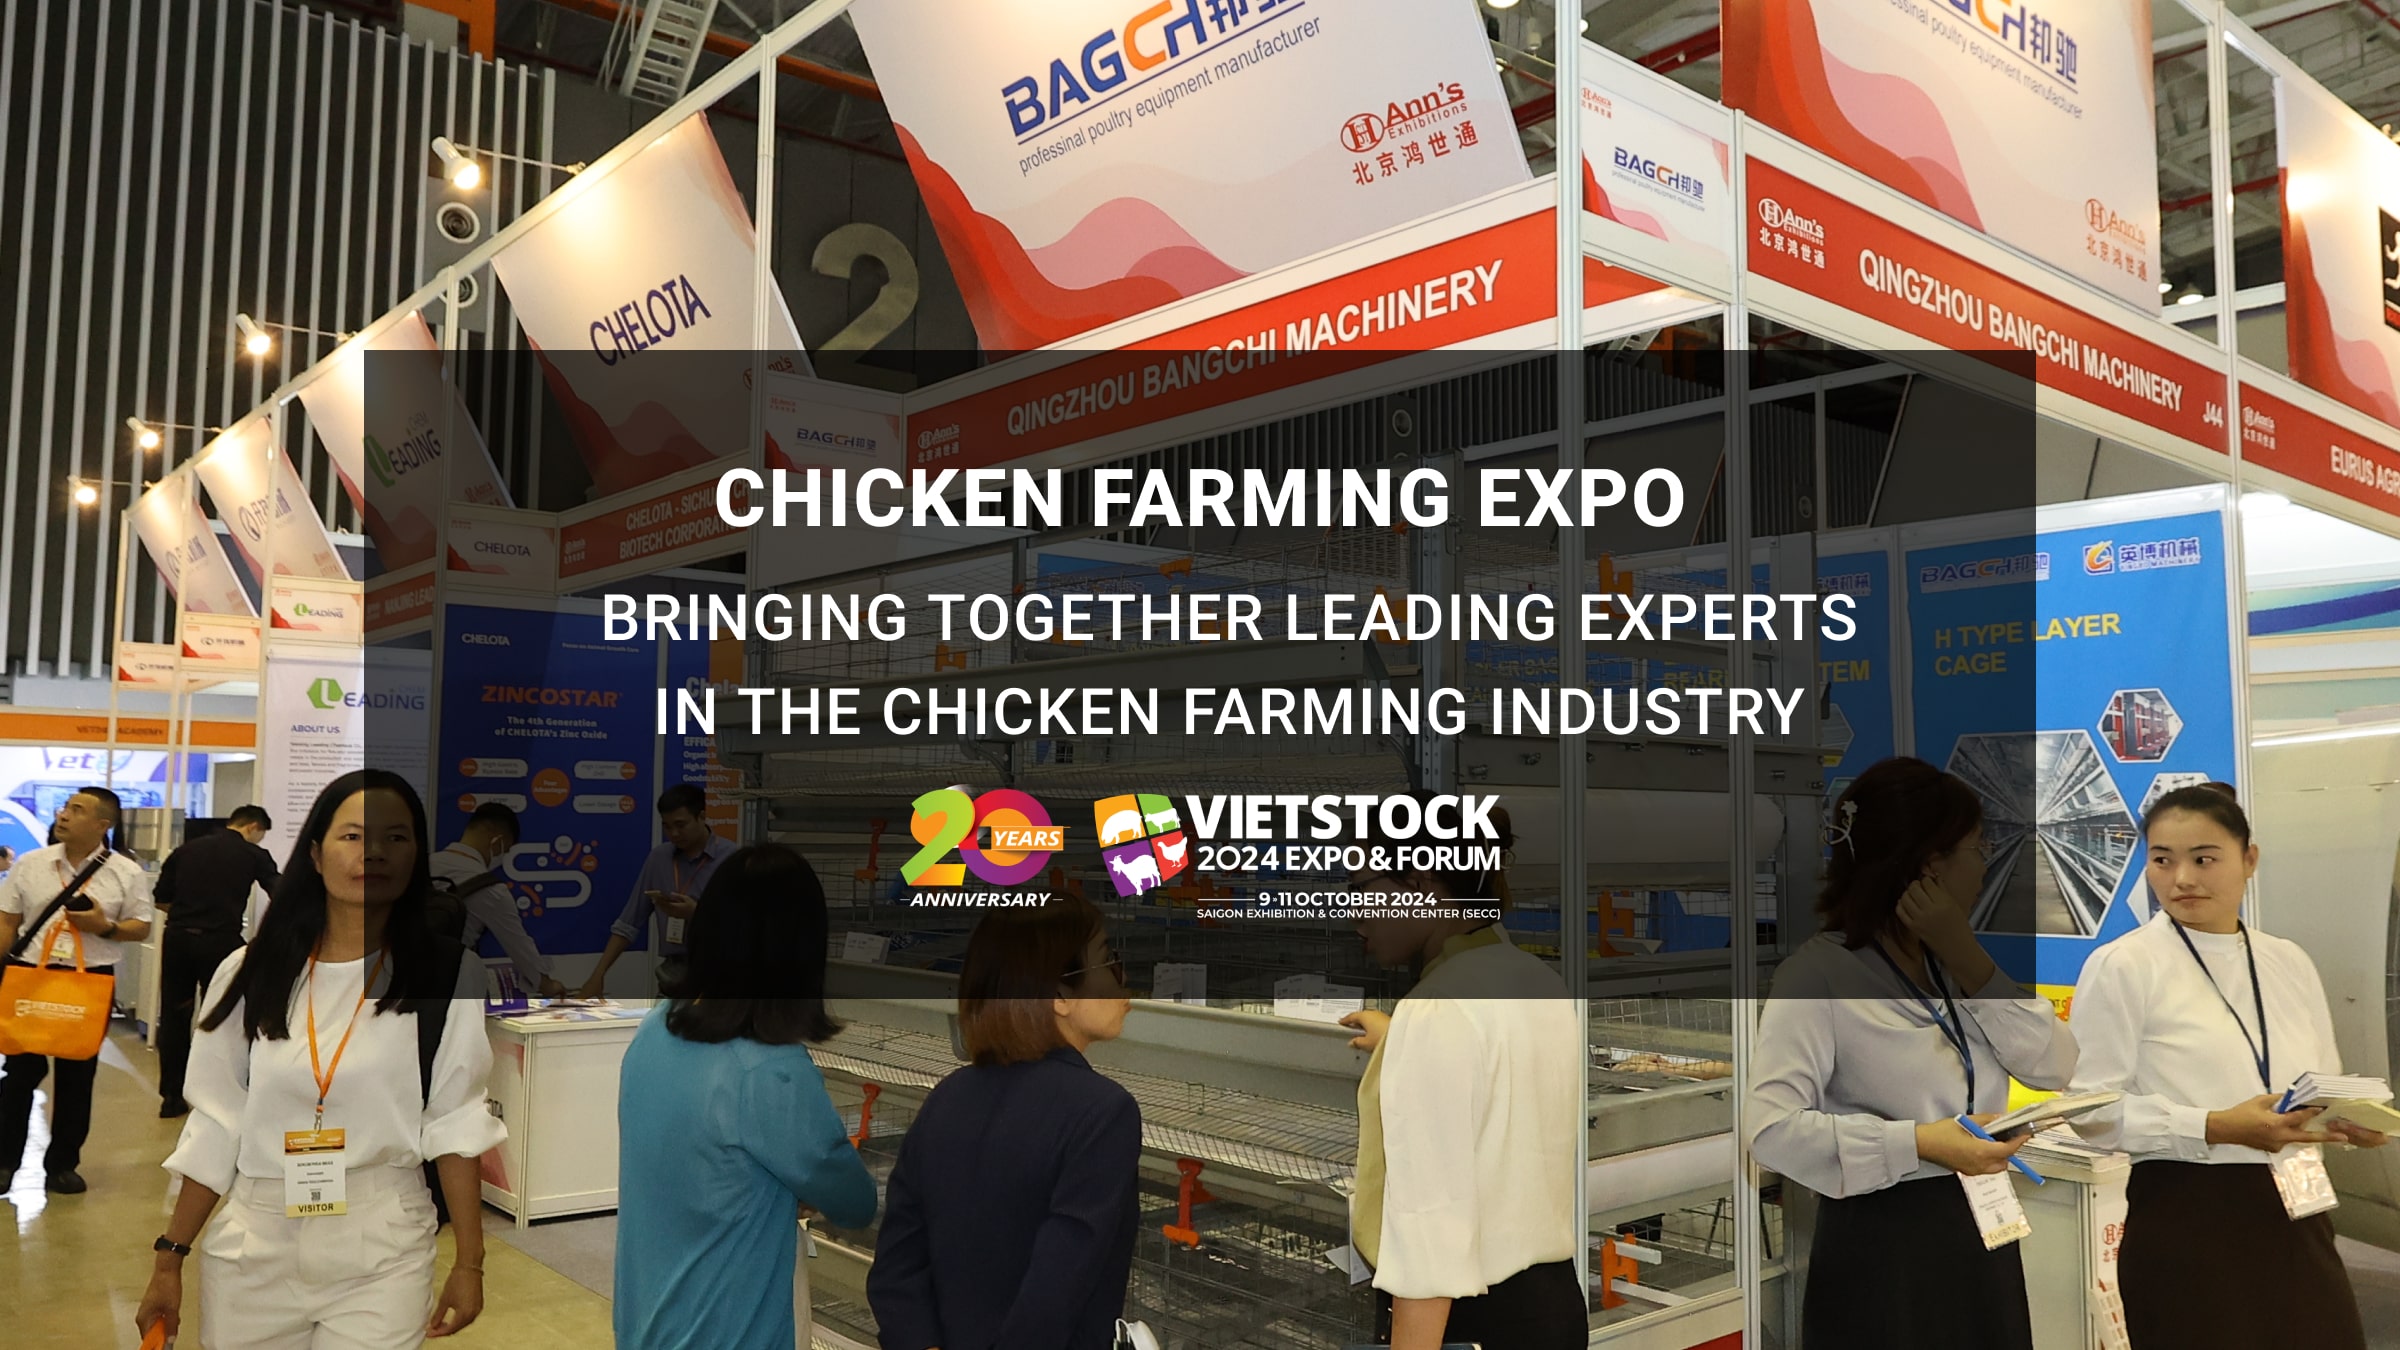 CHICKEN FARMING EXPO: BRINGING TOGETHER LEADING EXPERTS IN THE CHICKEN FARMING INDUSTRY